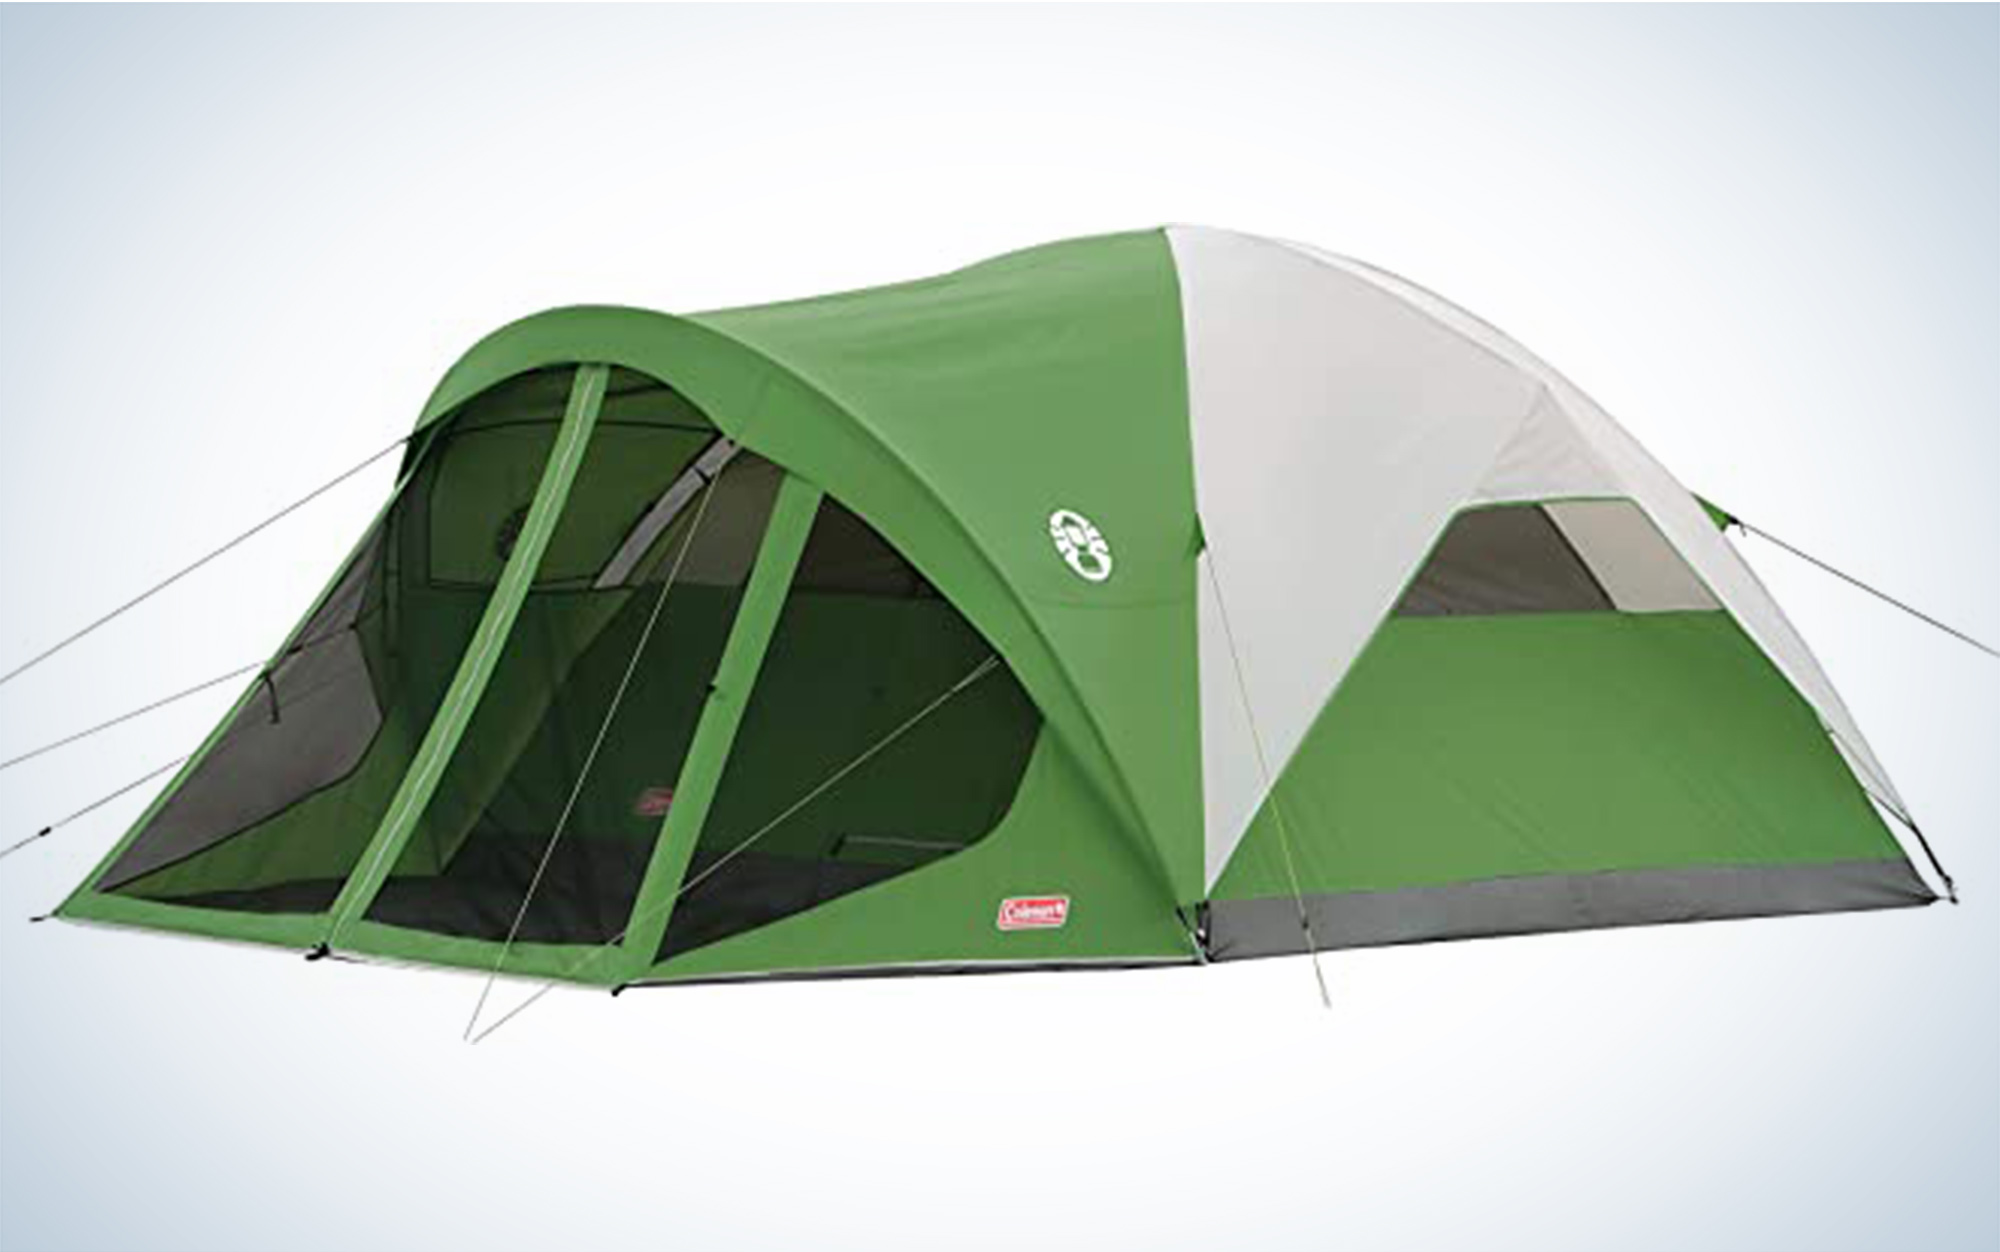 The Coleman Dome tent is on sale.